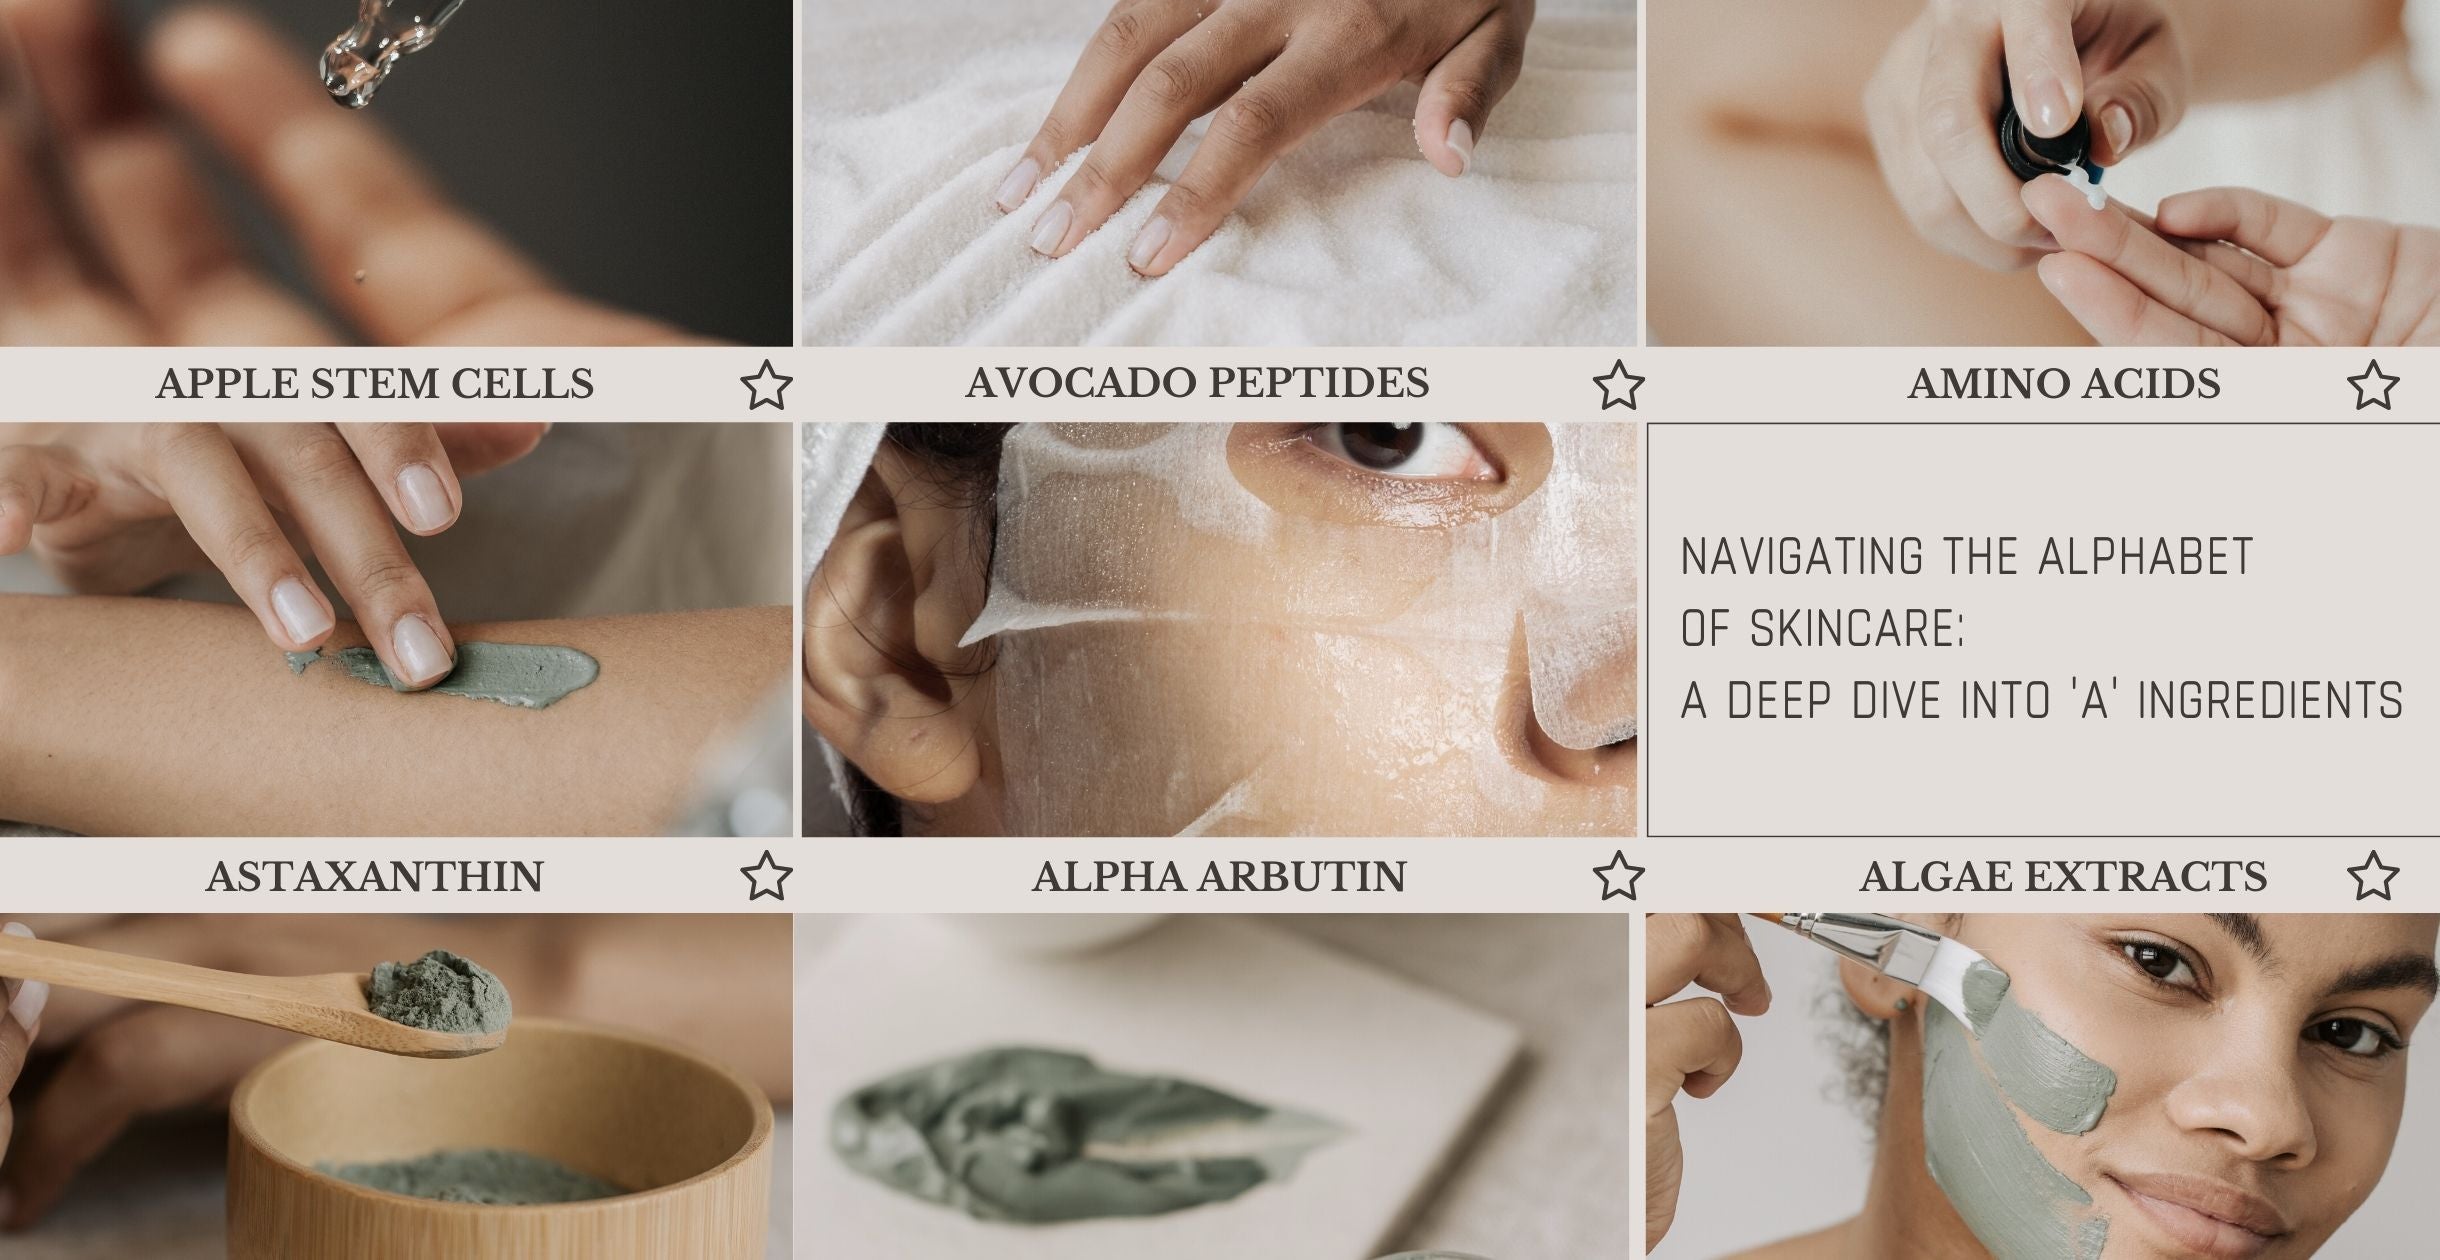 Navigating the Alphabet of Skincare: A Deep Dive into 'A' Ingredients